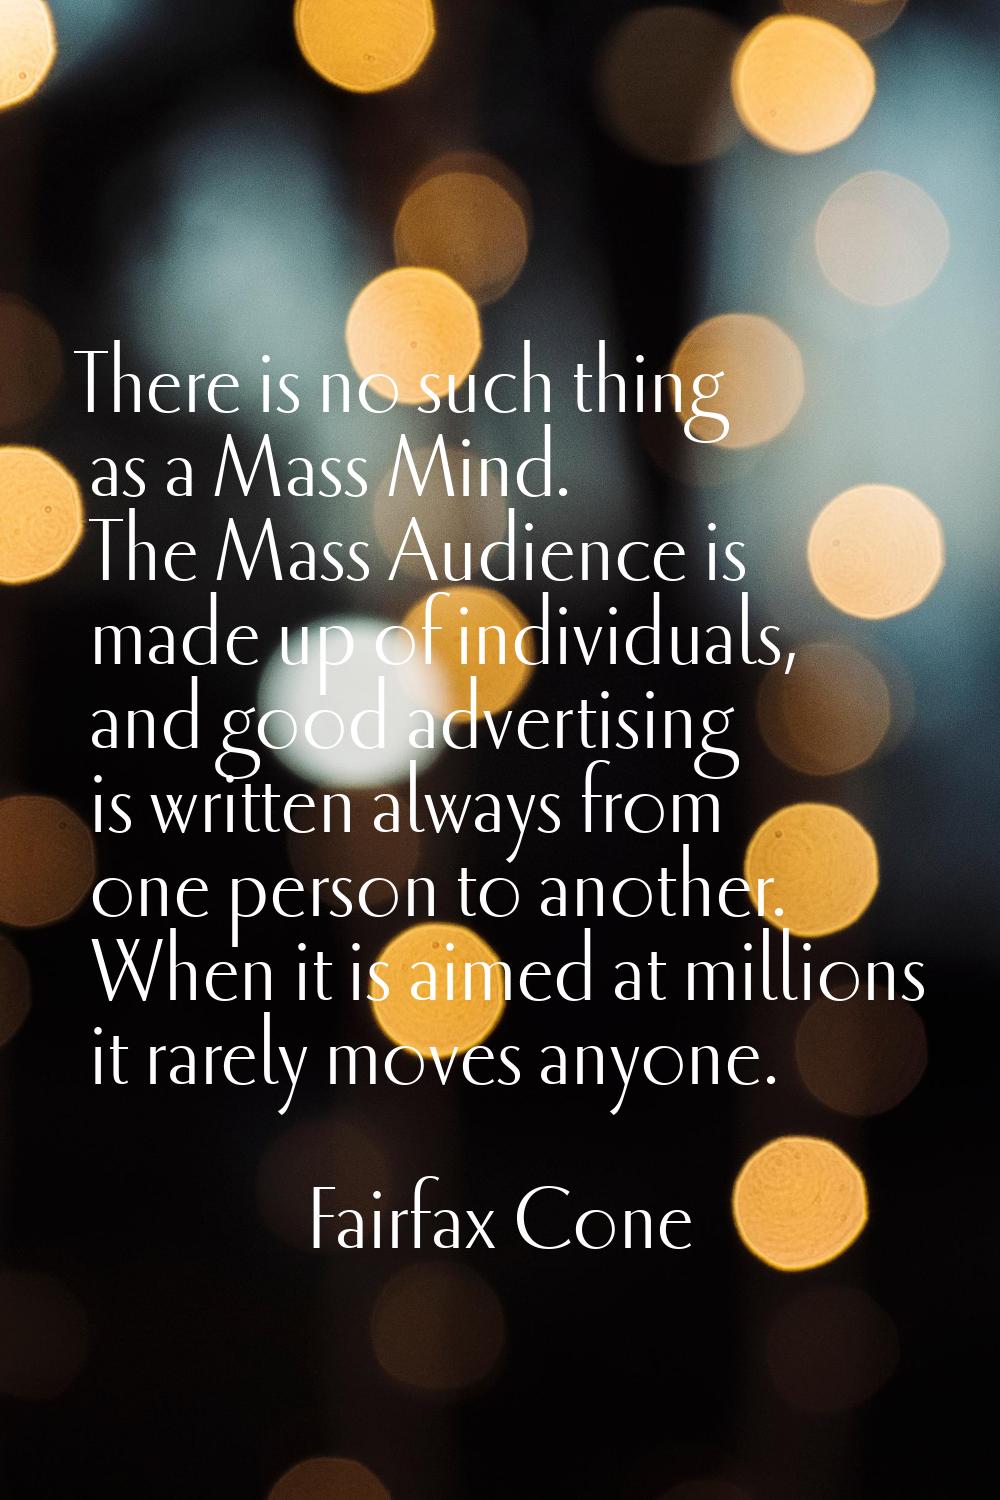 There is no such thing as a Mass Mind. The Mass Audience is made up of individuals, and good advert